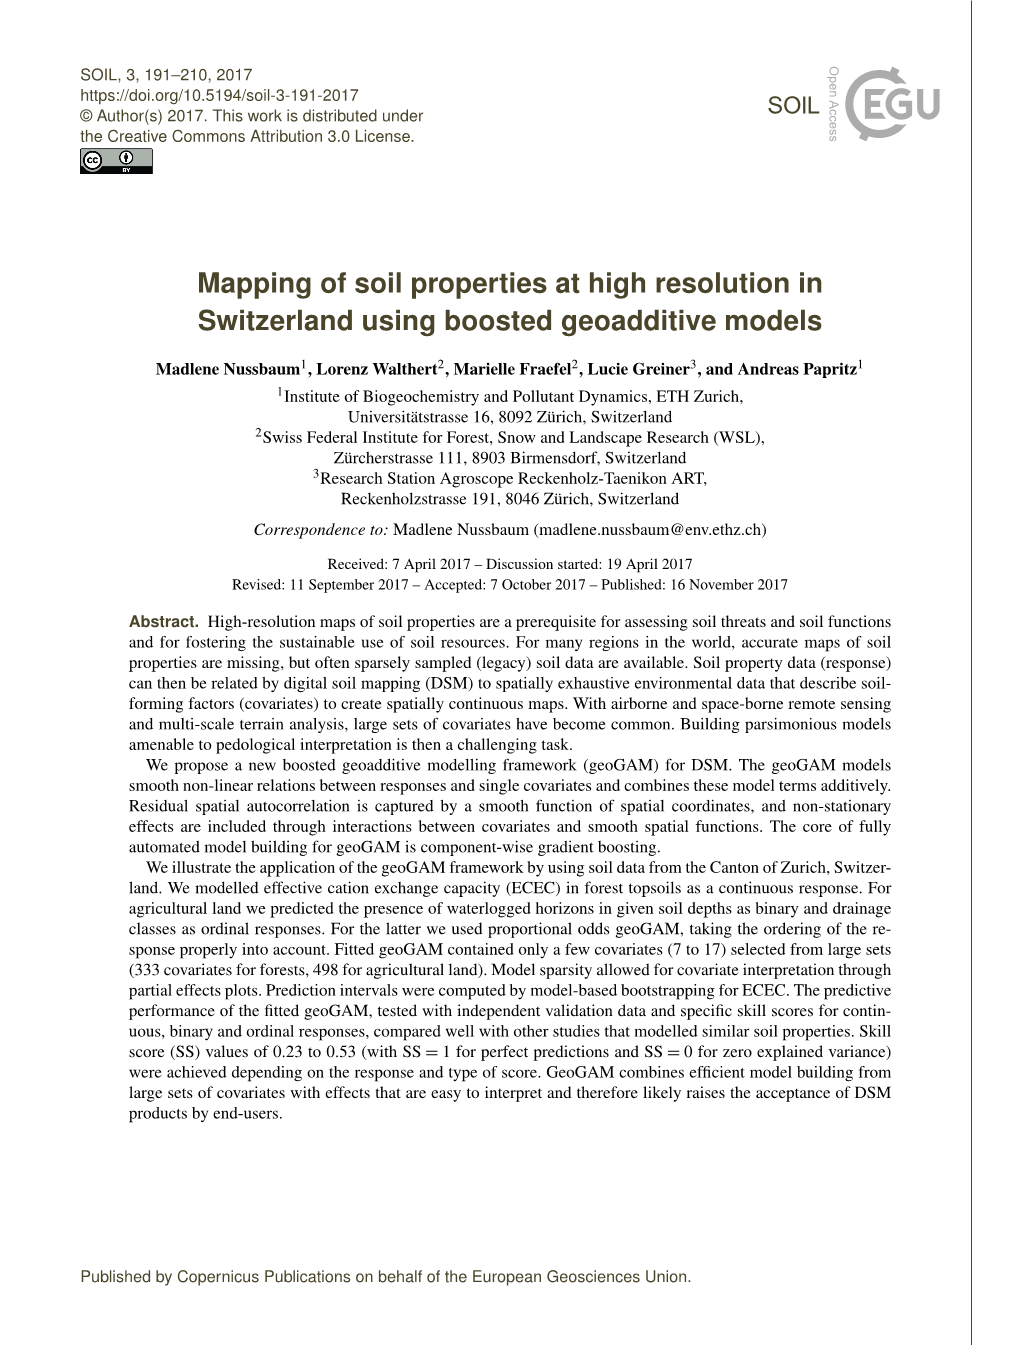 Mapping of Soil Properties at High Resolution in Switzerland Using Boosted Geoadditive Models